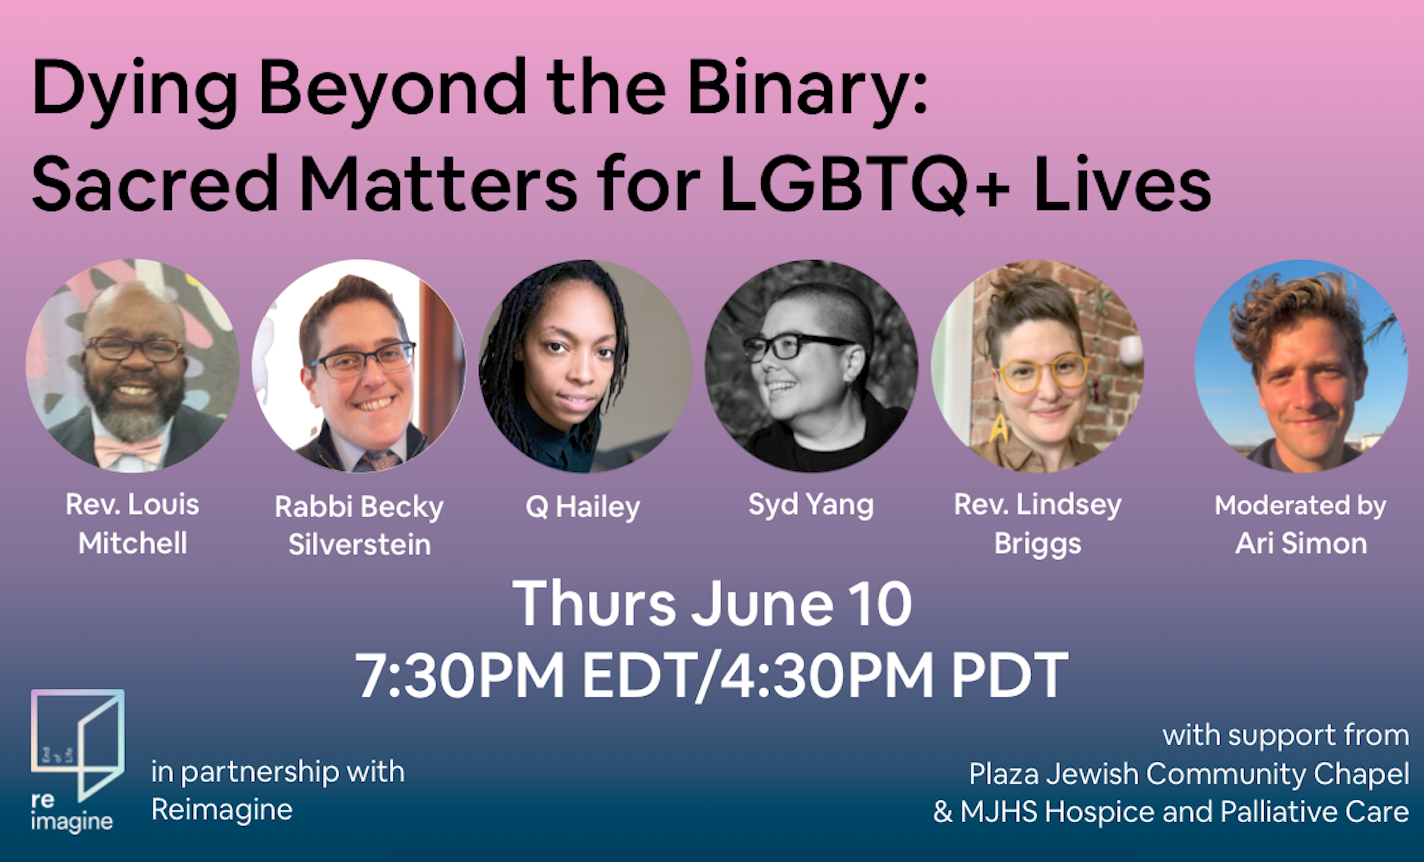 Dying Beyond the Binary: Sacred Matters for LGBTQ+ Lives